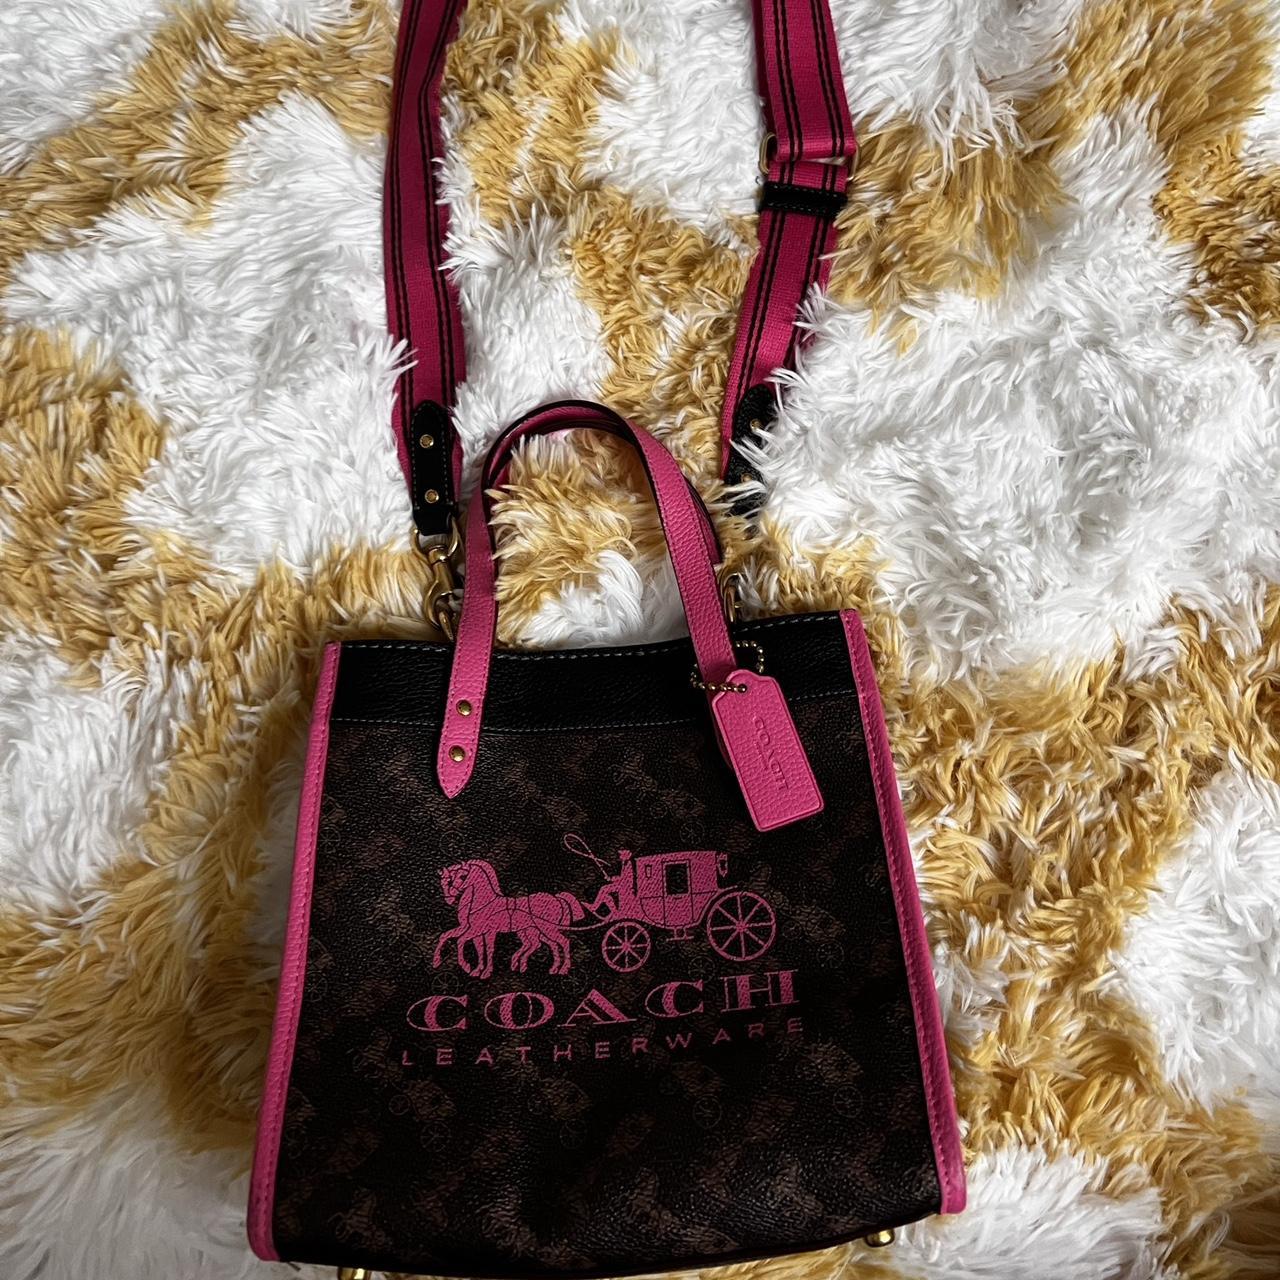 Buy Coach Field Tote Bag 22 with Horse & Carriage Print